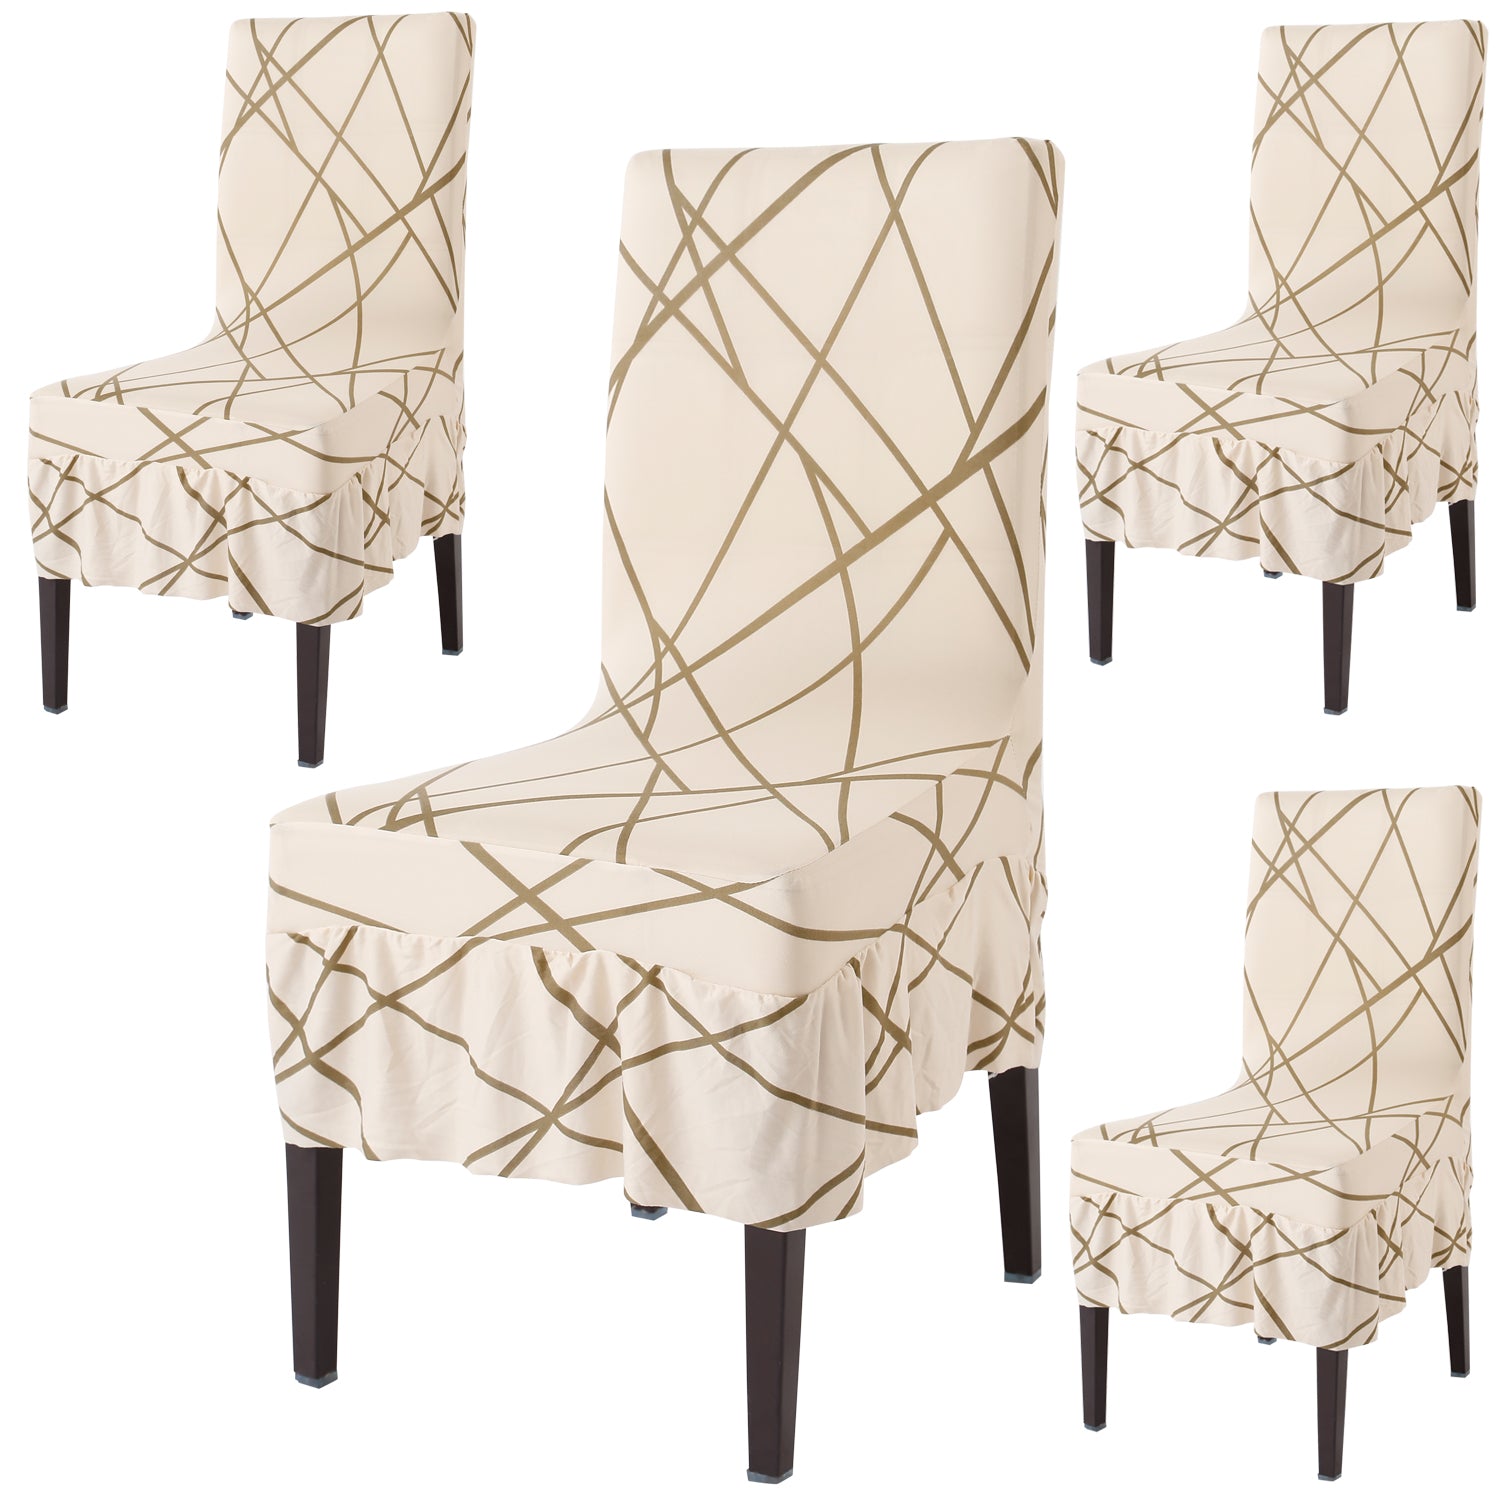 Elastic Stretchable Dining Chair Cover with Frill, Beige Abstract Line